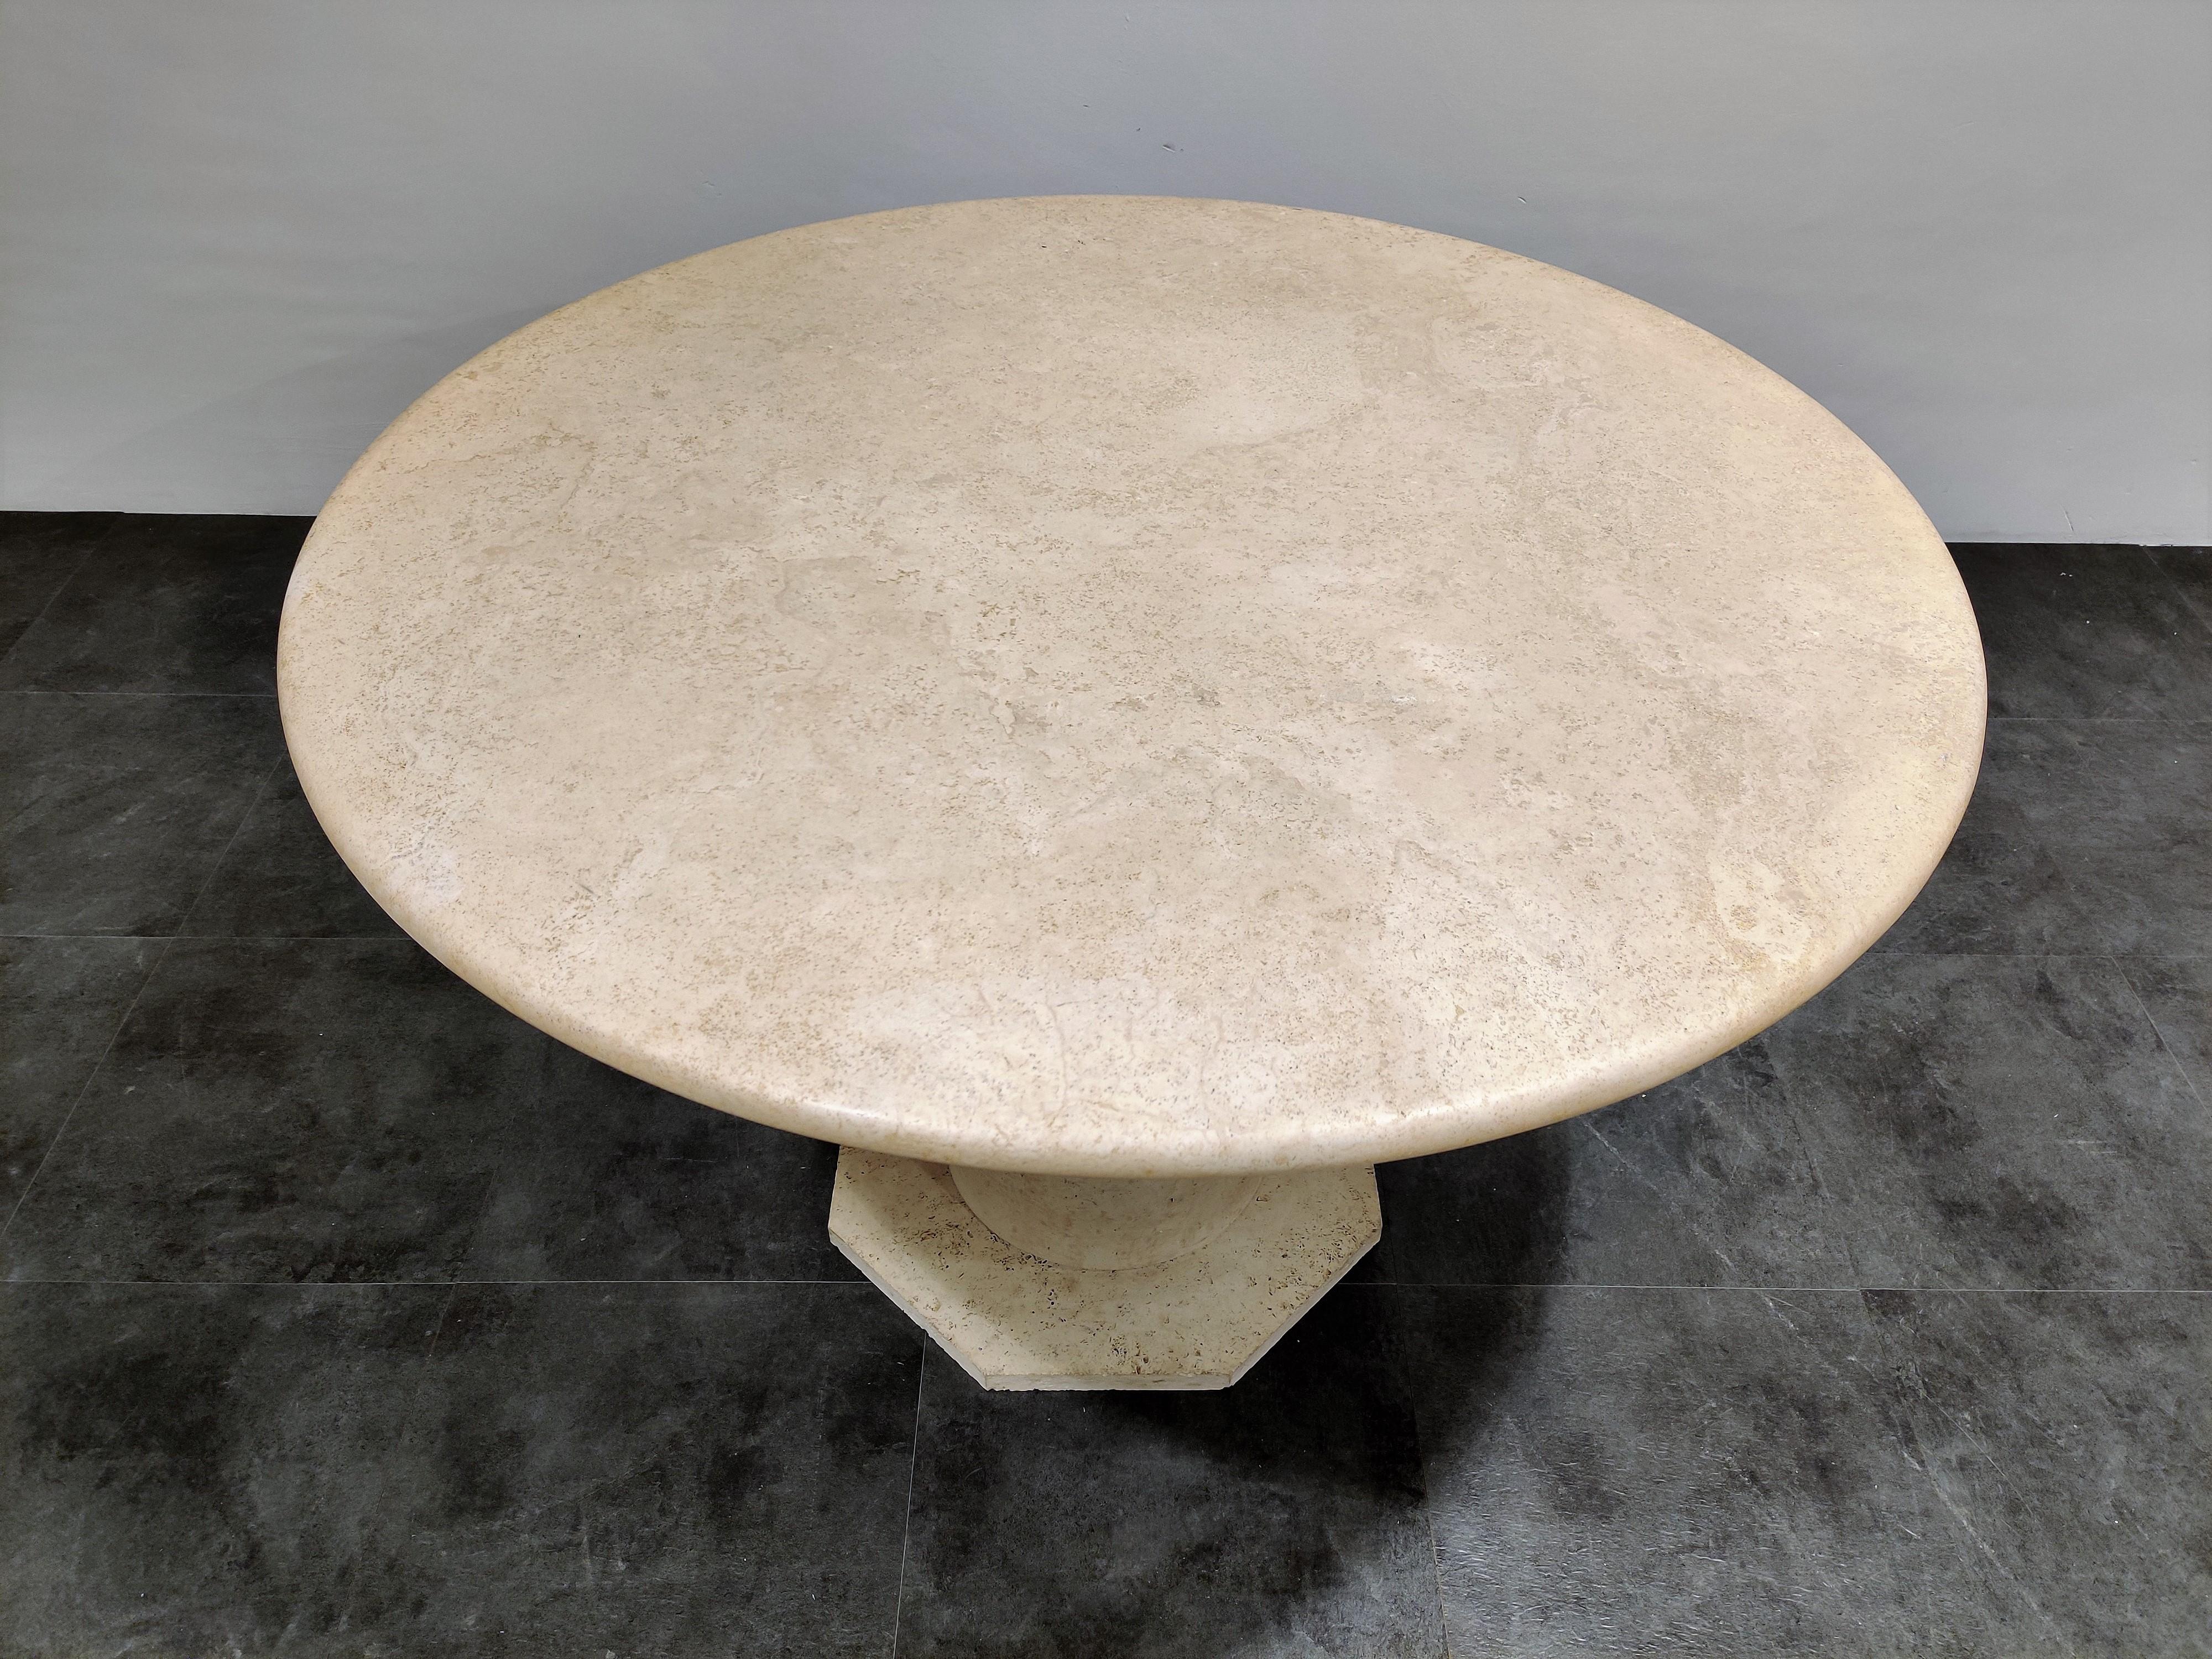 Beautiful dining or center table made from travertine stone.

The table has a beautiful octagonal base supporting a round finely finished top.

Good condition

1970s, Italy

Measures: Height 78cm/30.70